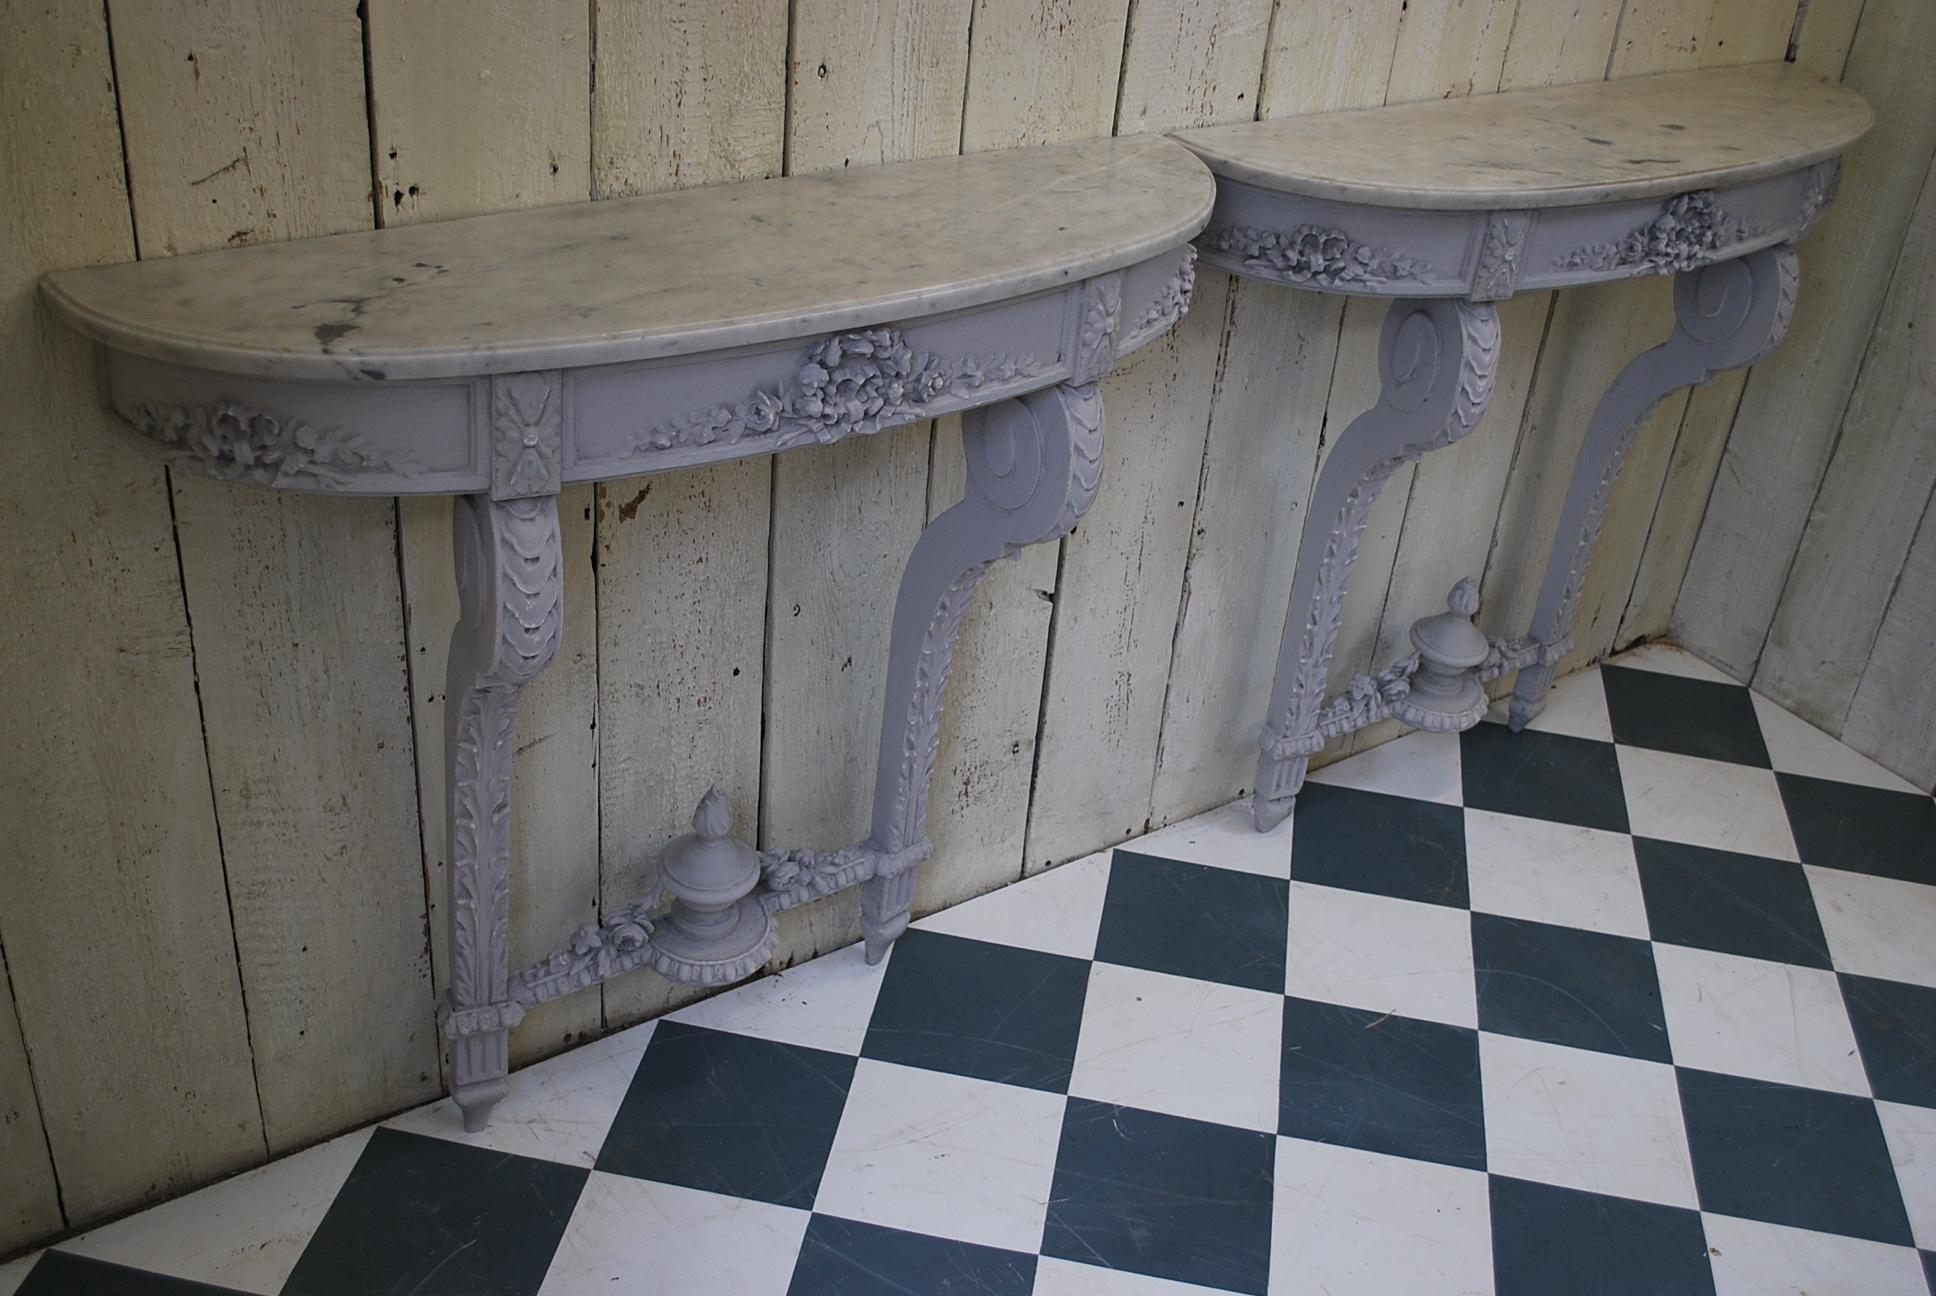 An unusual pair of French console tables with original Carrera marble tops. Decorated in grey paint of foliage and classical motifs.
Pairs of decorative consoles are always hard to find and these are a nice example.